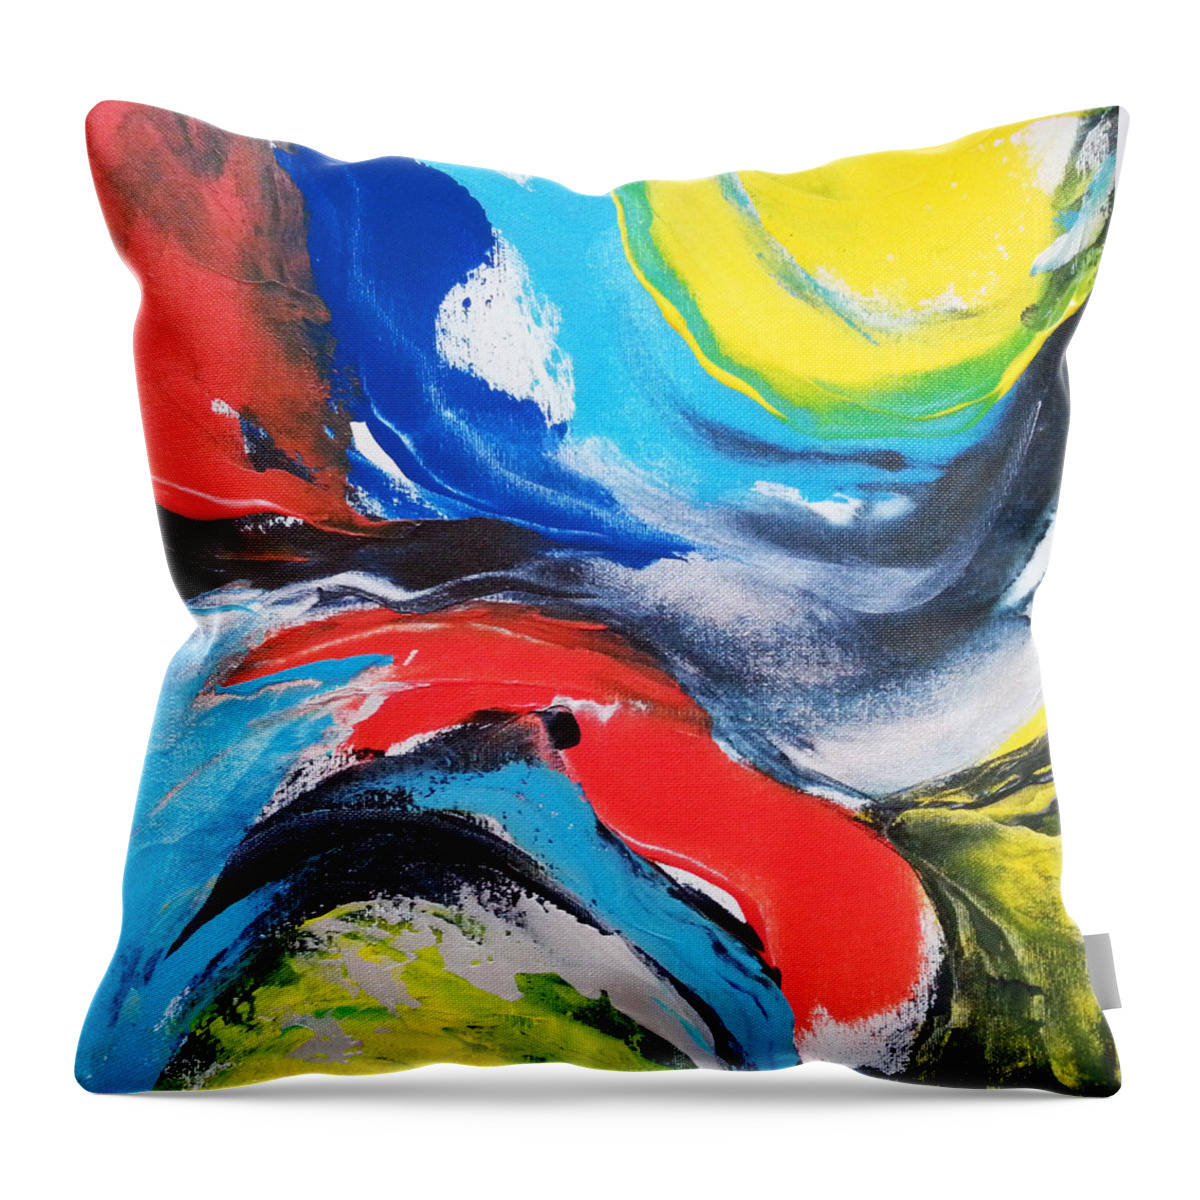 Abstract Throw Pillow featuring the painting Mistakes by Florentina Maria Popescu